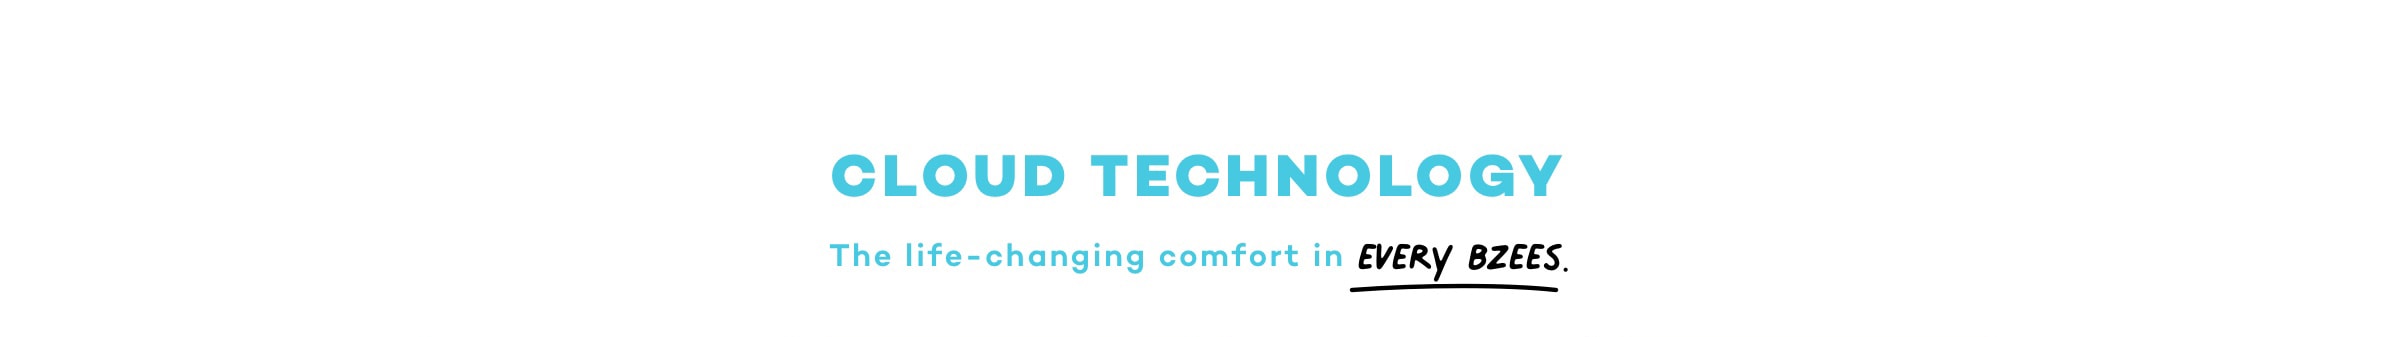 cloud technology the life changing comfort in every Bzees